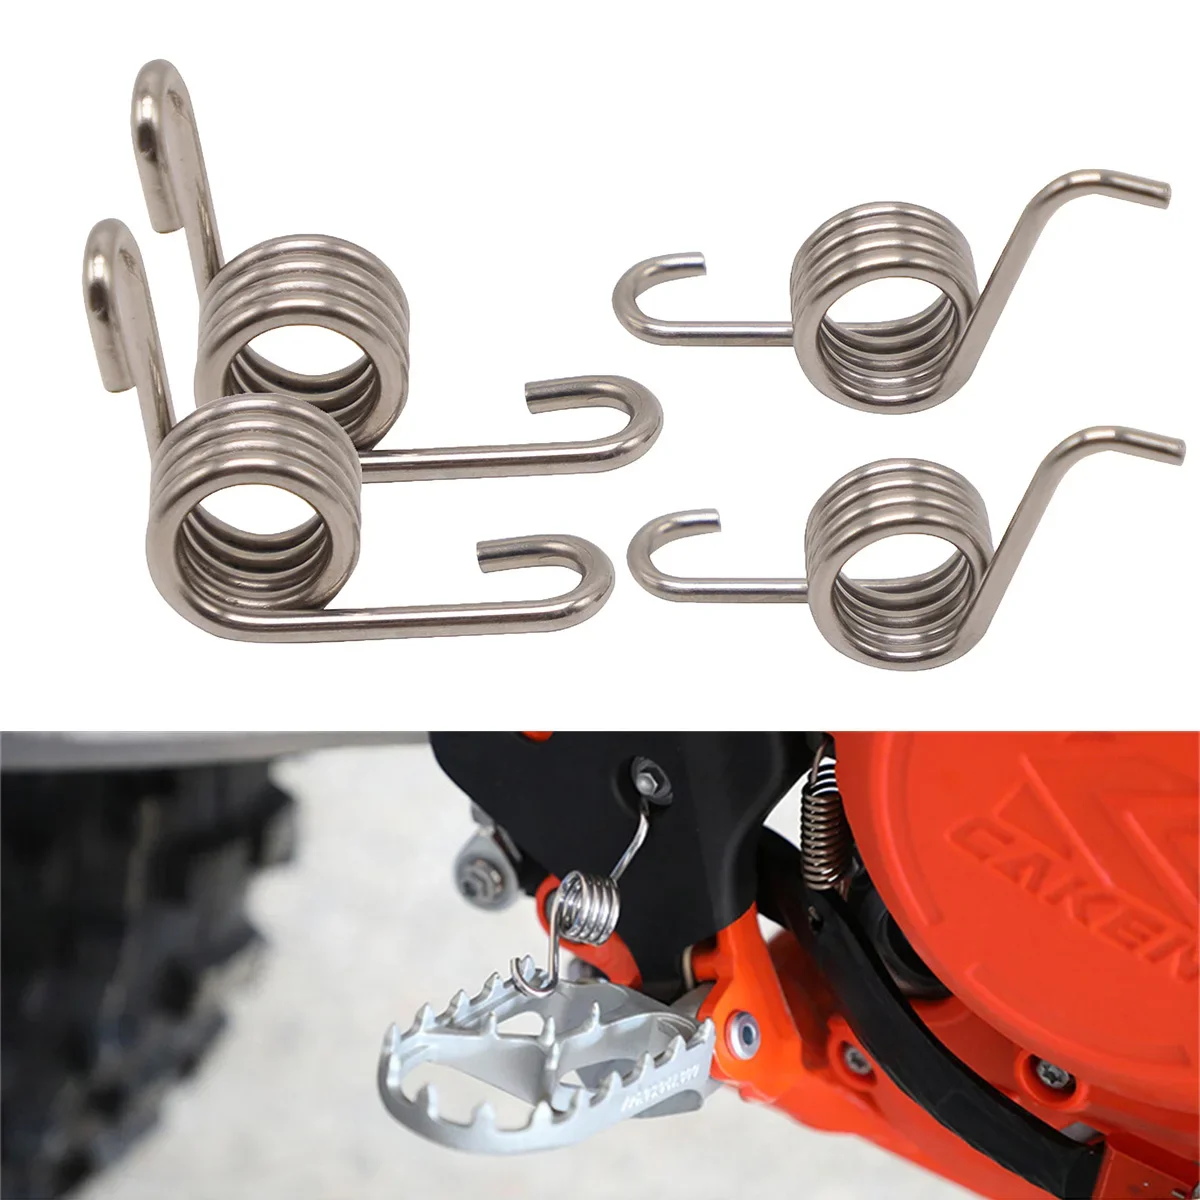 Foot rest footpegs pedals spring for ktm sx sx f exc exc f xc xc f thumb200